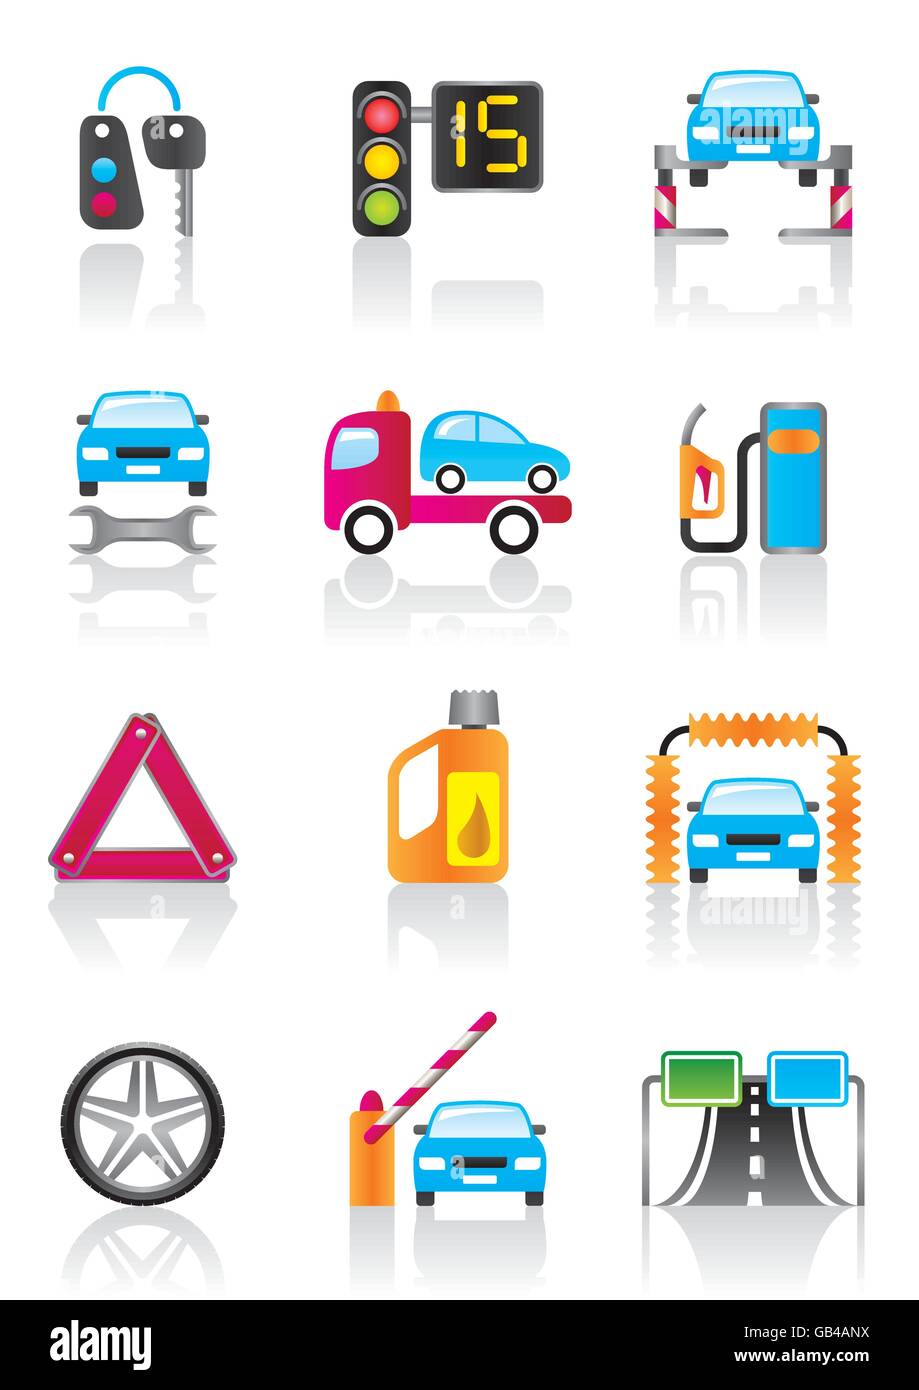 Car service, auto assistance and auto accessories - vector illustration Stock Vector